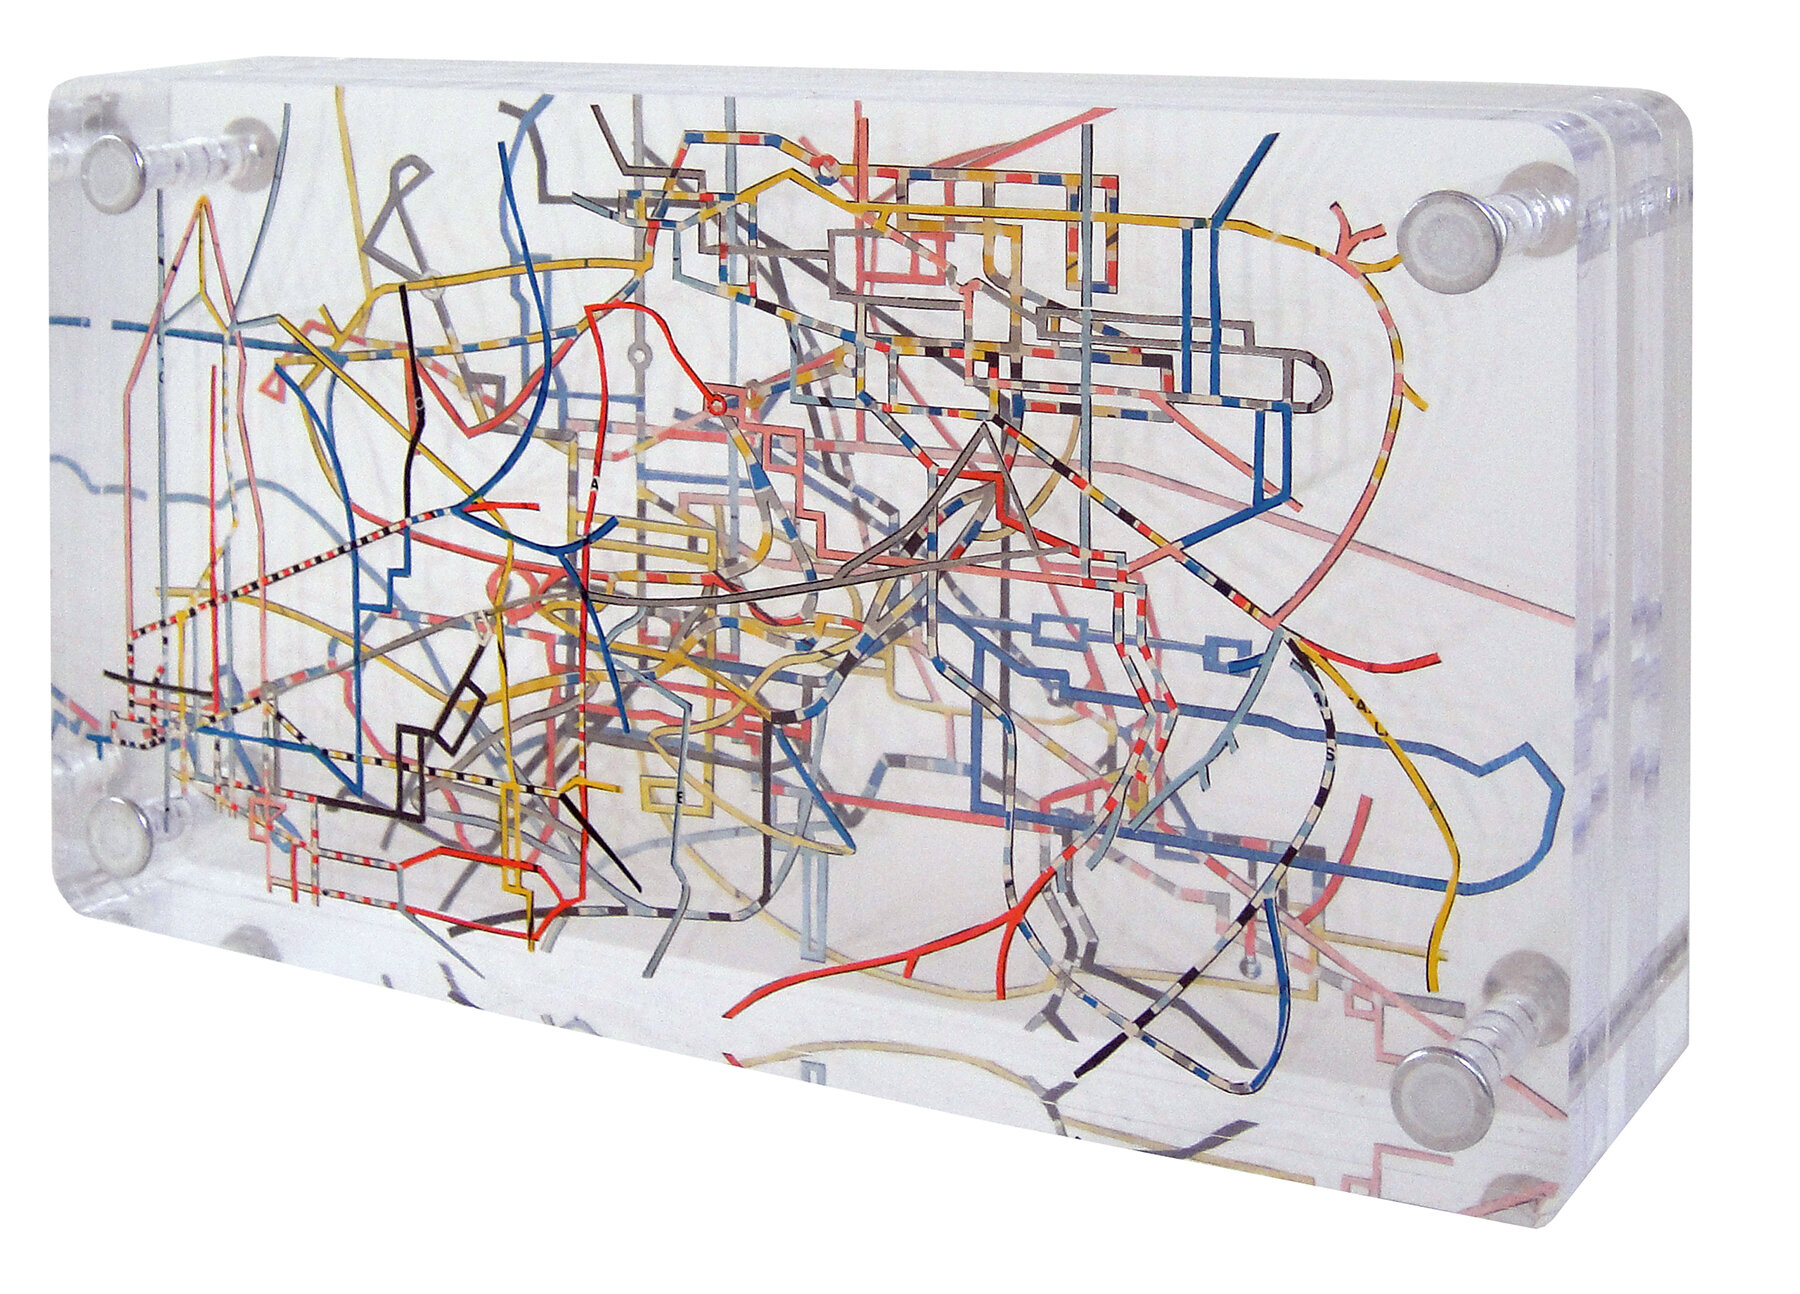   Primary Routes;   excavated vintage map, acrylic, metal;  4.25h x 7.5 w x 1.5d inches 